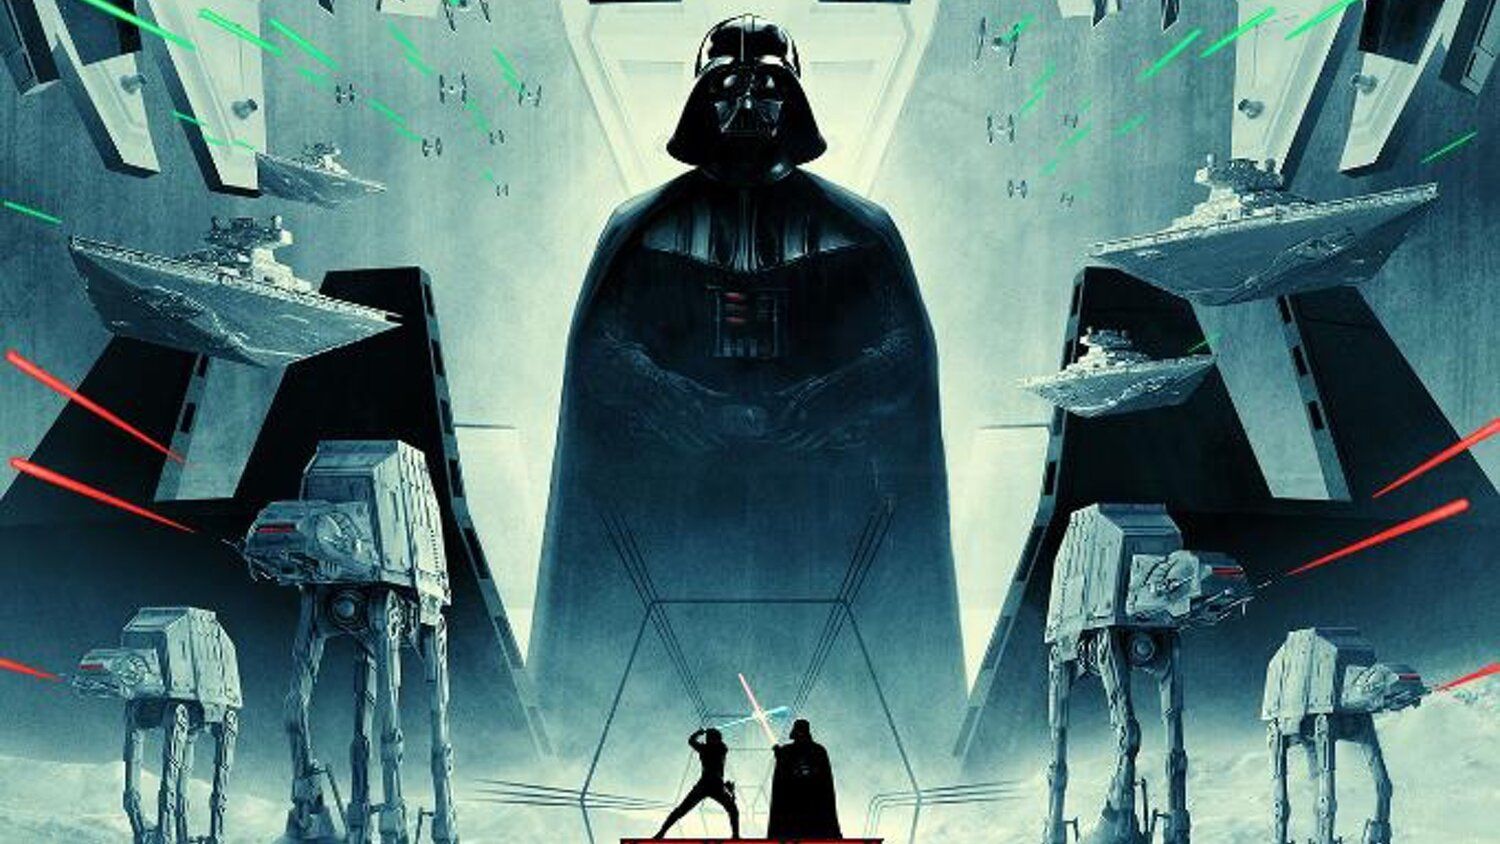 Poster Art for STAR WARS: THE EMPIRE STRIKES BACK and Time Capsule Celebrate the 40th Anniversary